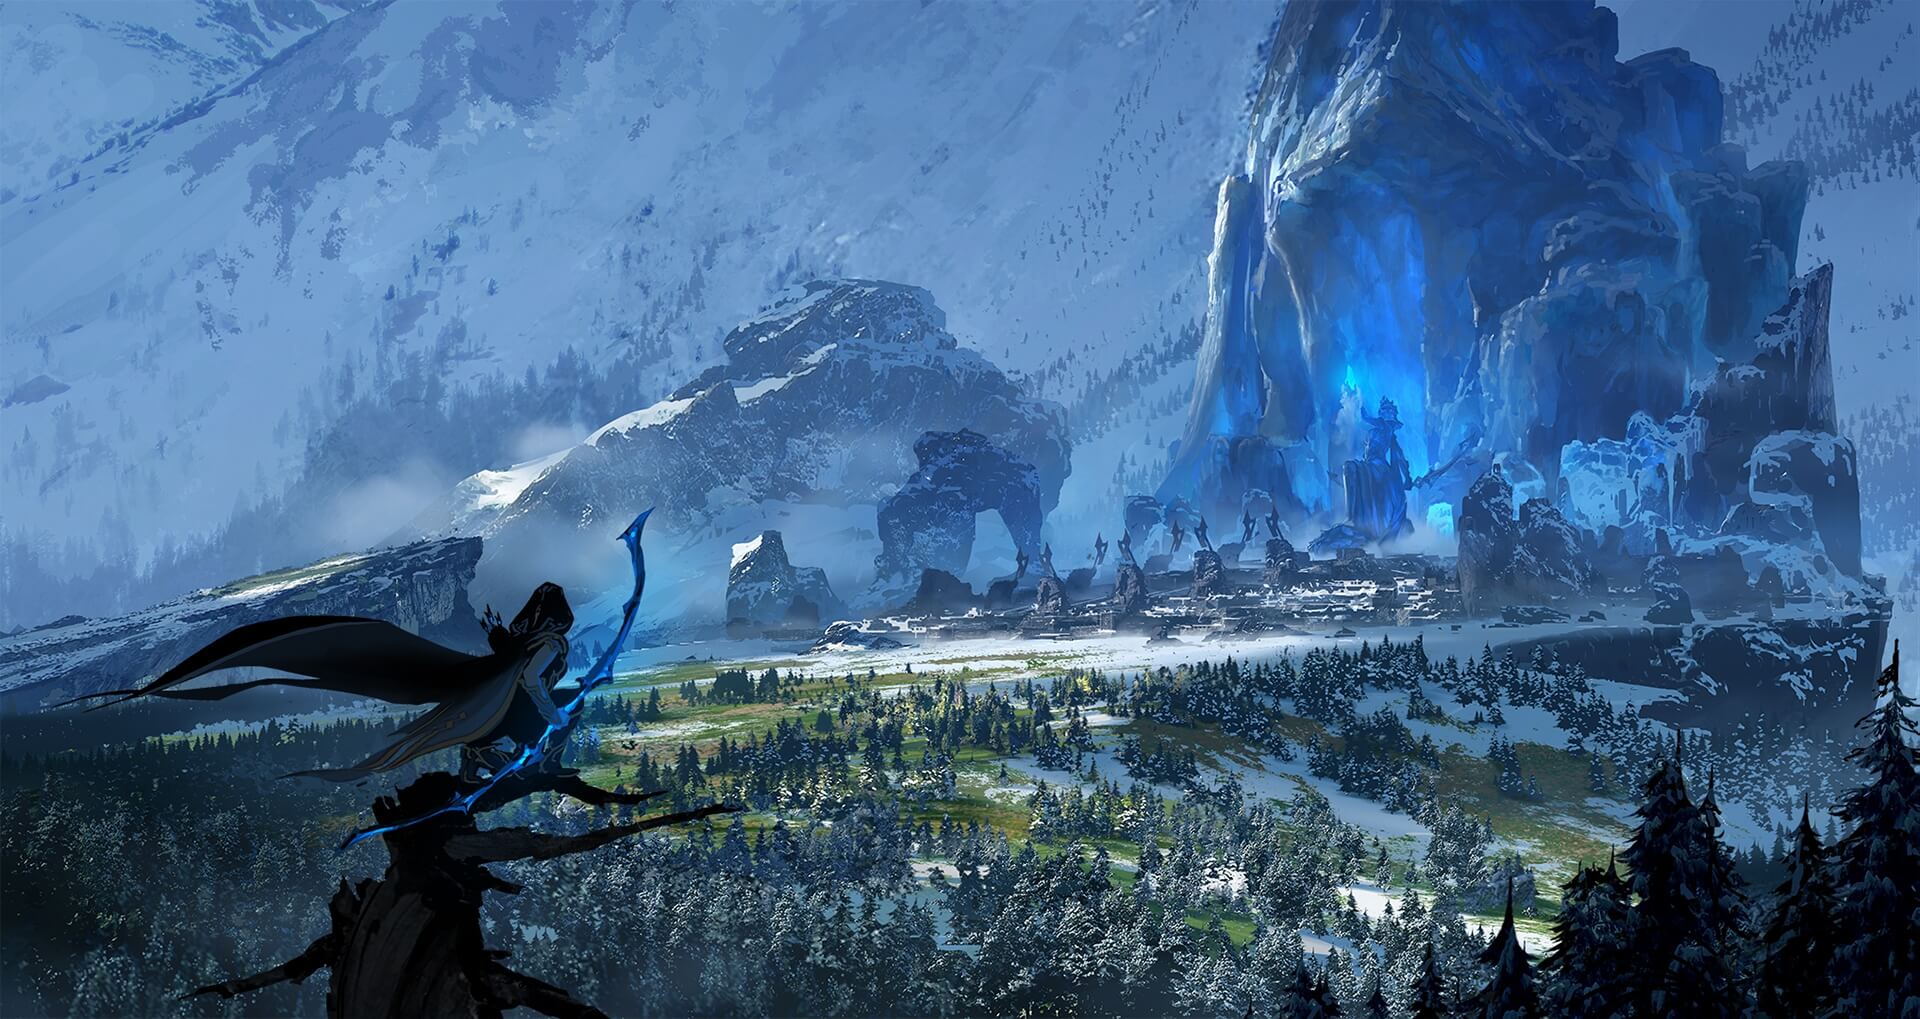 Warmother Ashe overlooking The Freljord